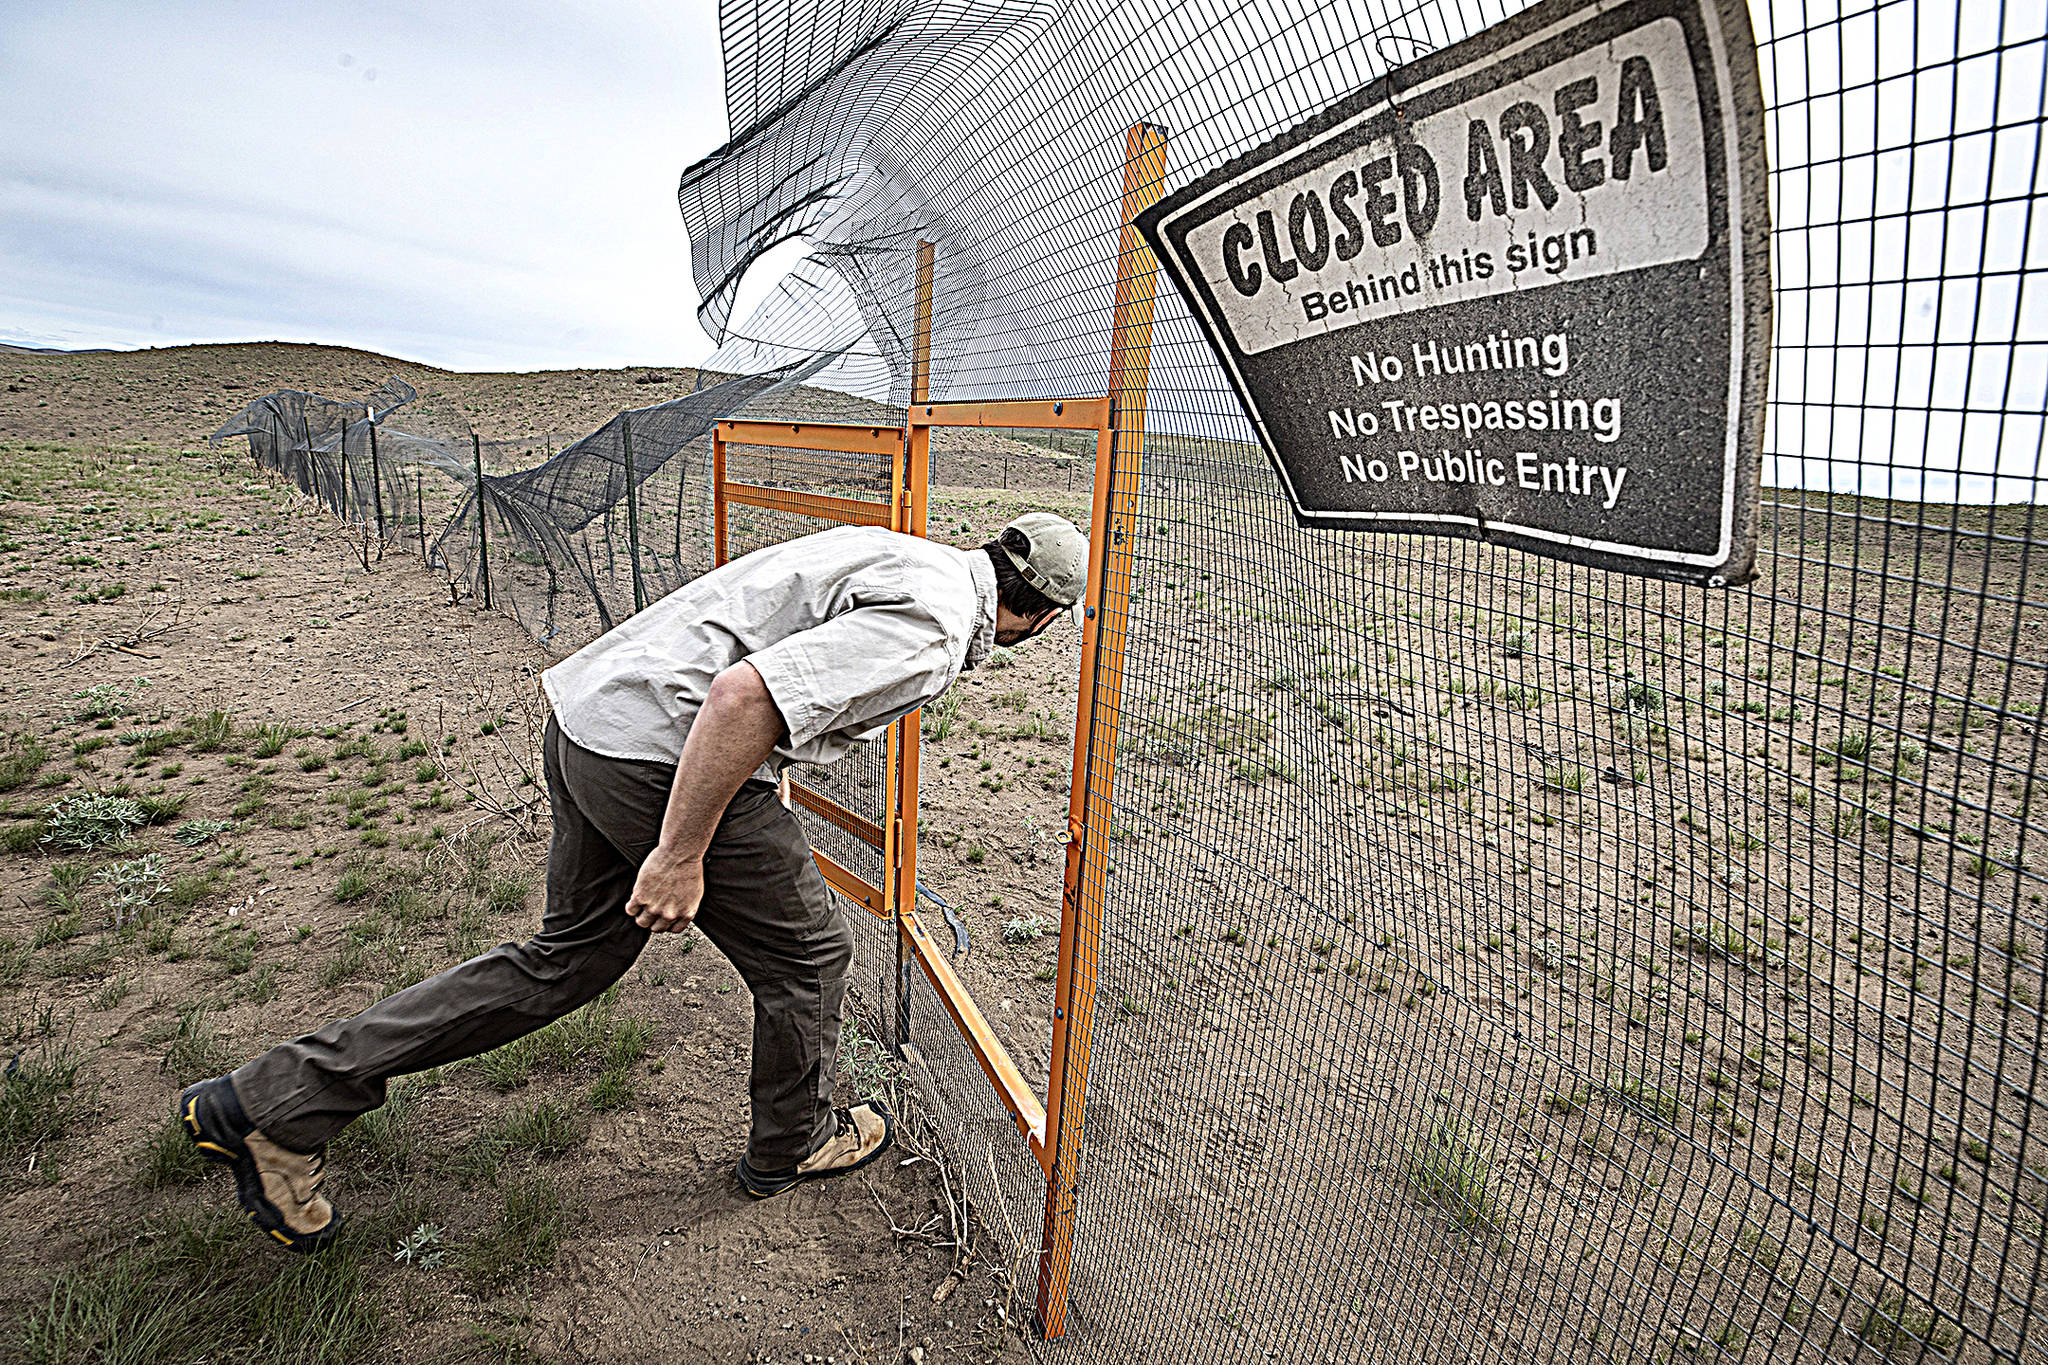 photos by Steve Ringman | The Seattle Times 
Jon Gallie, pygmy rabbit biologist for the Washington Department of Fish and Wildlife, enters a rabbit breeding enclosure in April that was destroyed along with all the rabbits in a 2020 wildfire in the Sagebrush Flat Wildlife Area in Douglas County, setting back the breeding program for years.